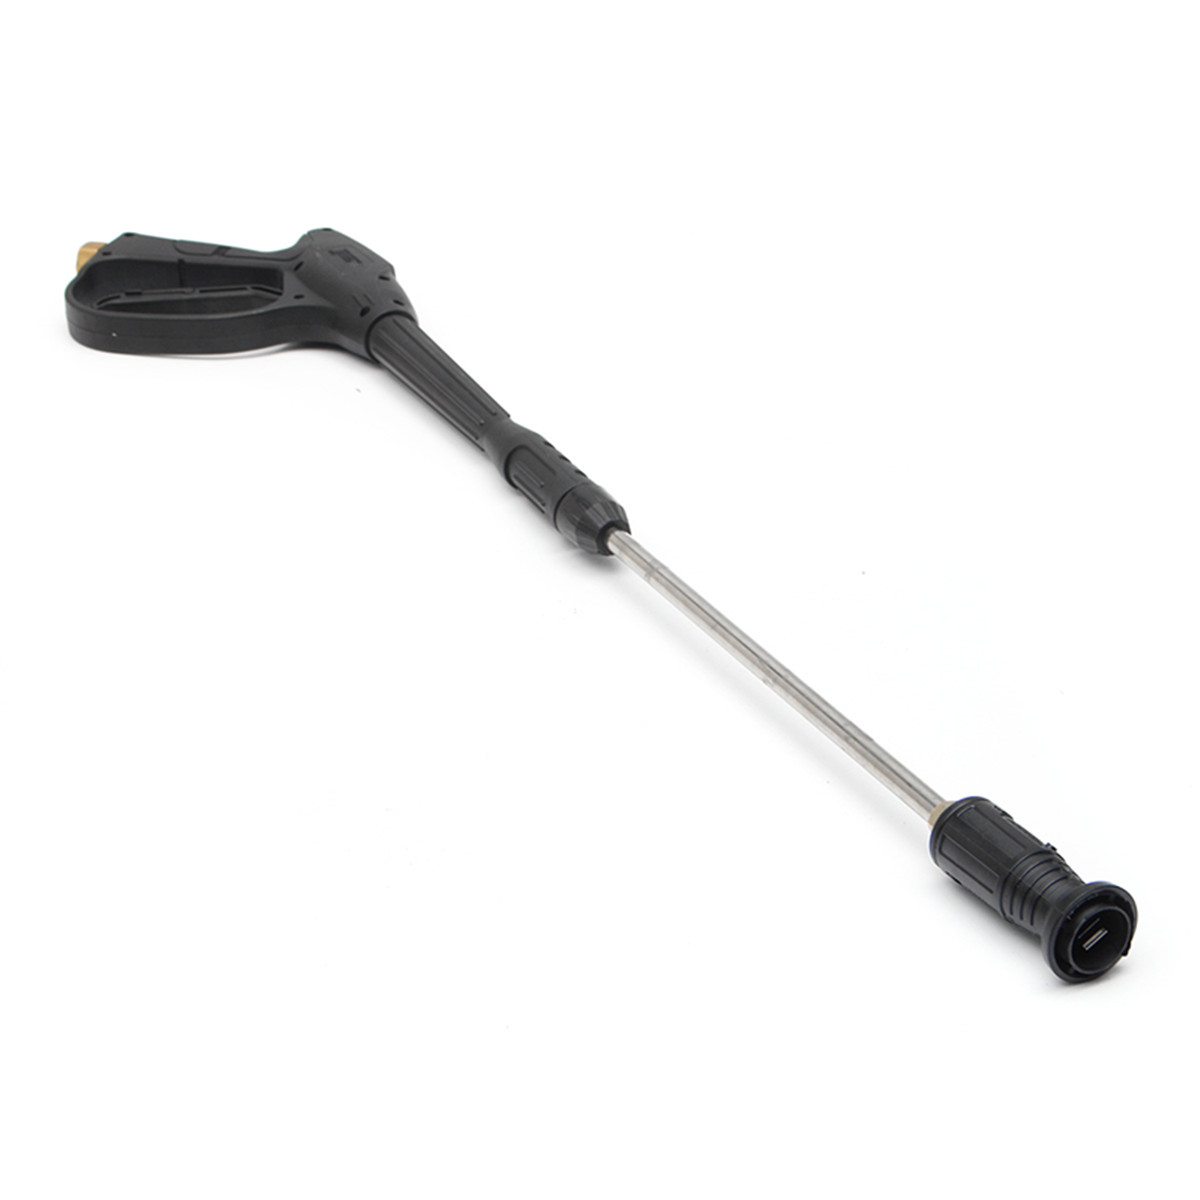 High-Pressure-Washer-Spray-Nozzle-Home-Water-Gun-With-Extension-Rod-1170153-7